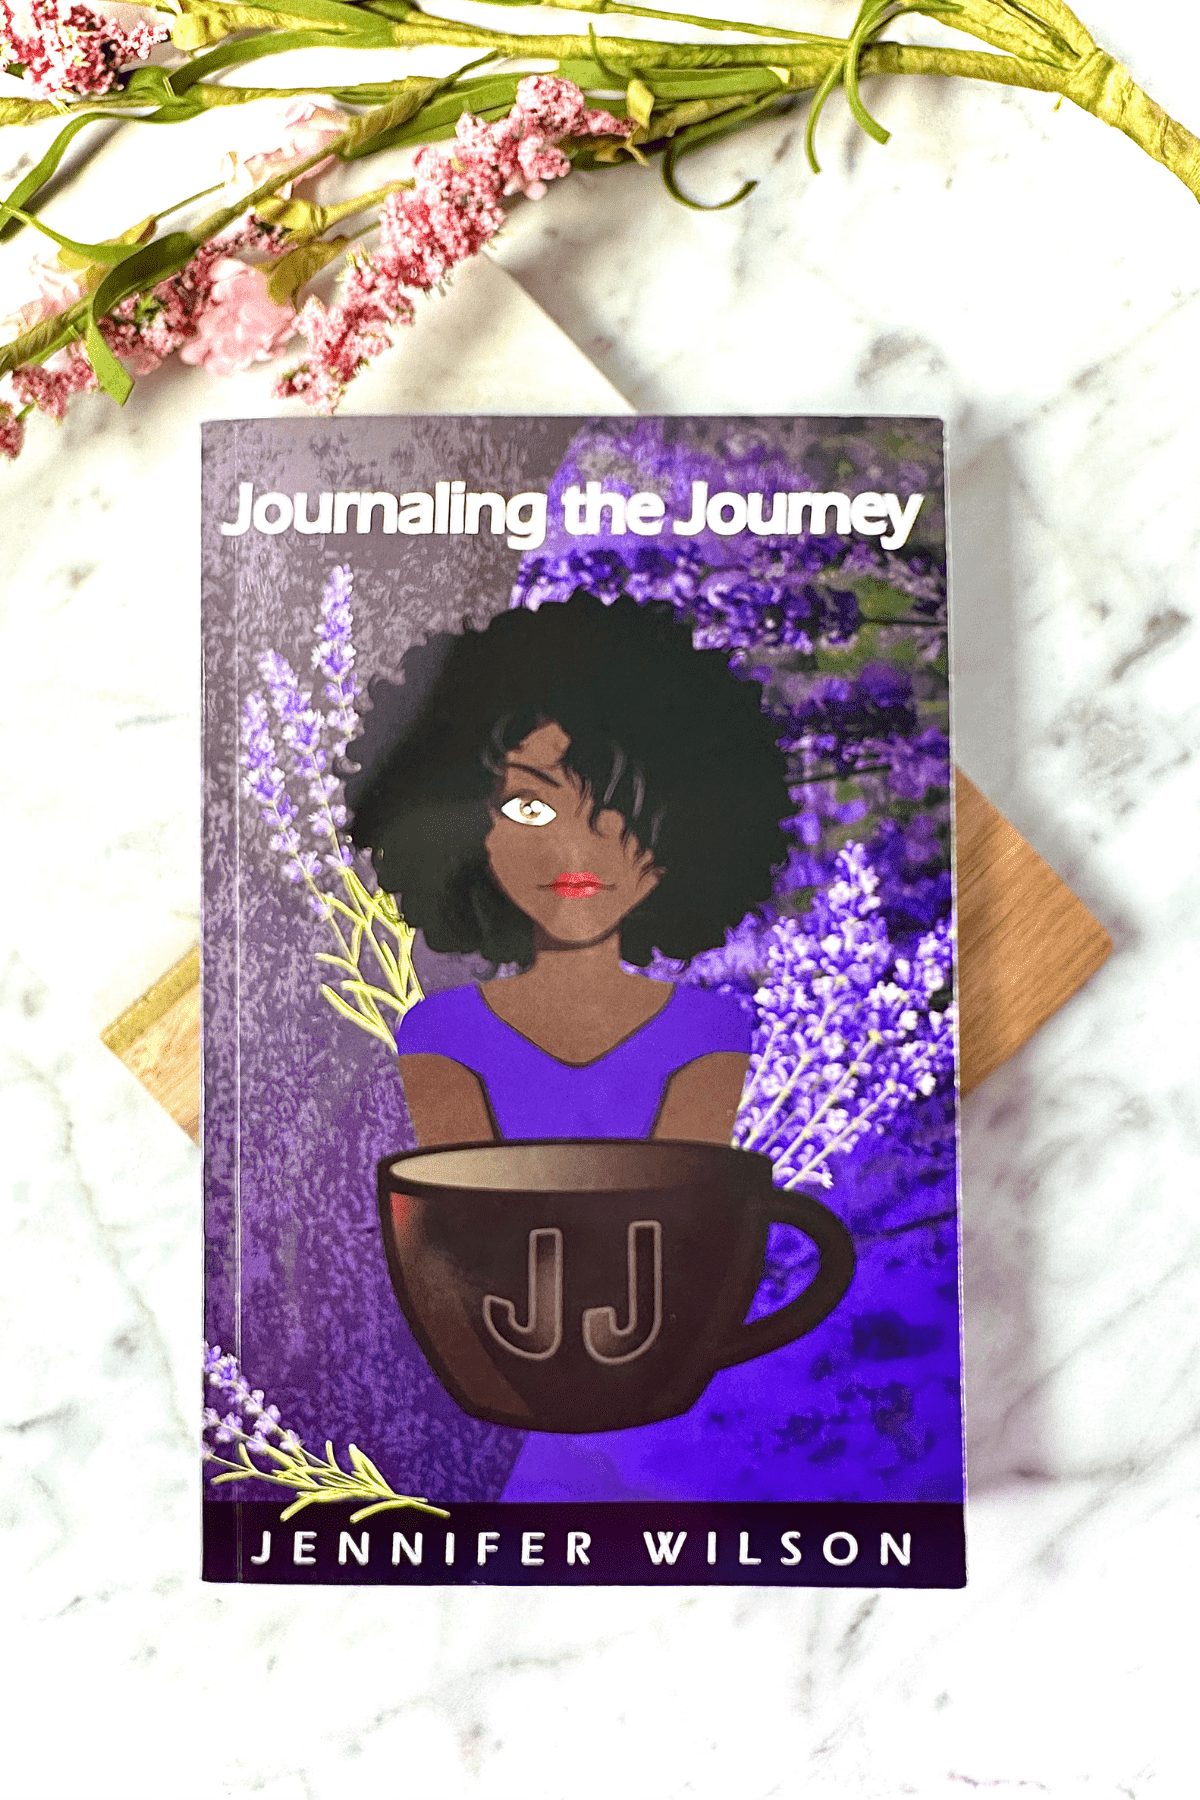 A picture of the book Journaling the Journey by Jennifer Wilson.